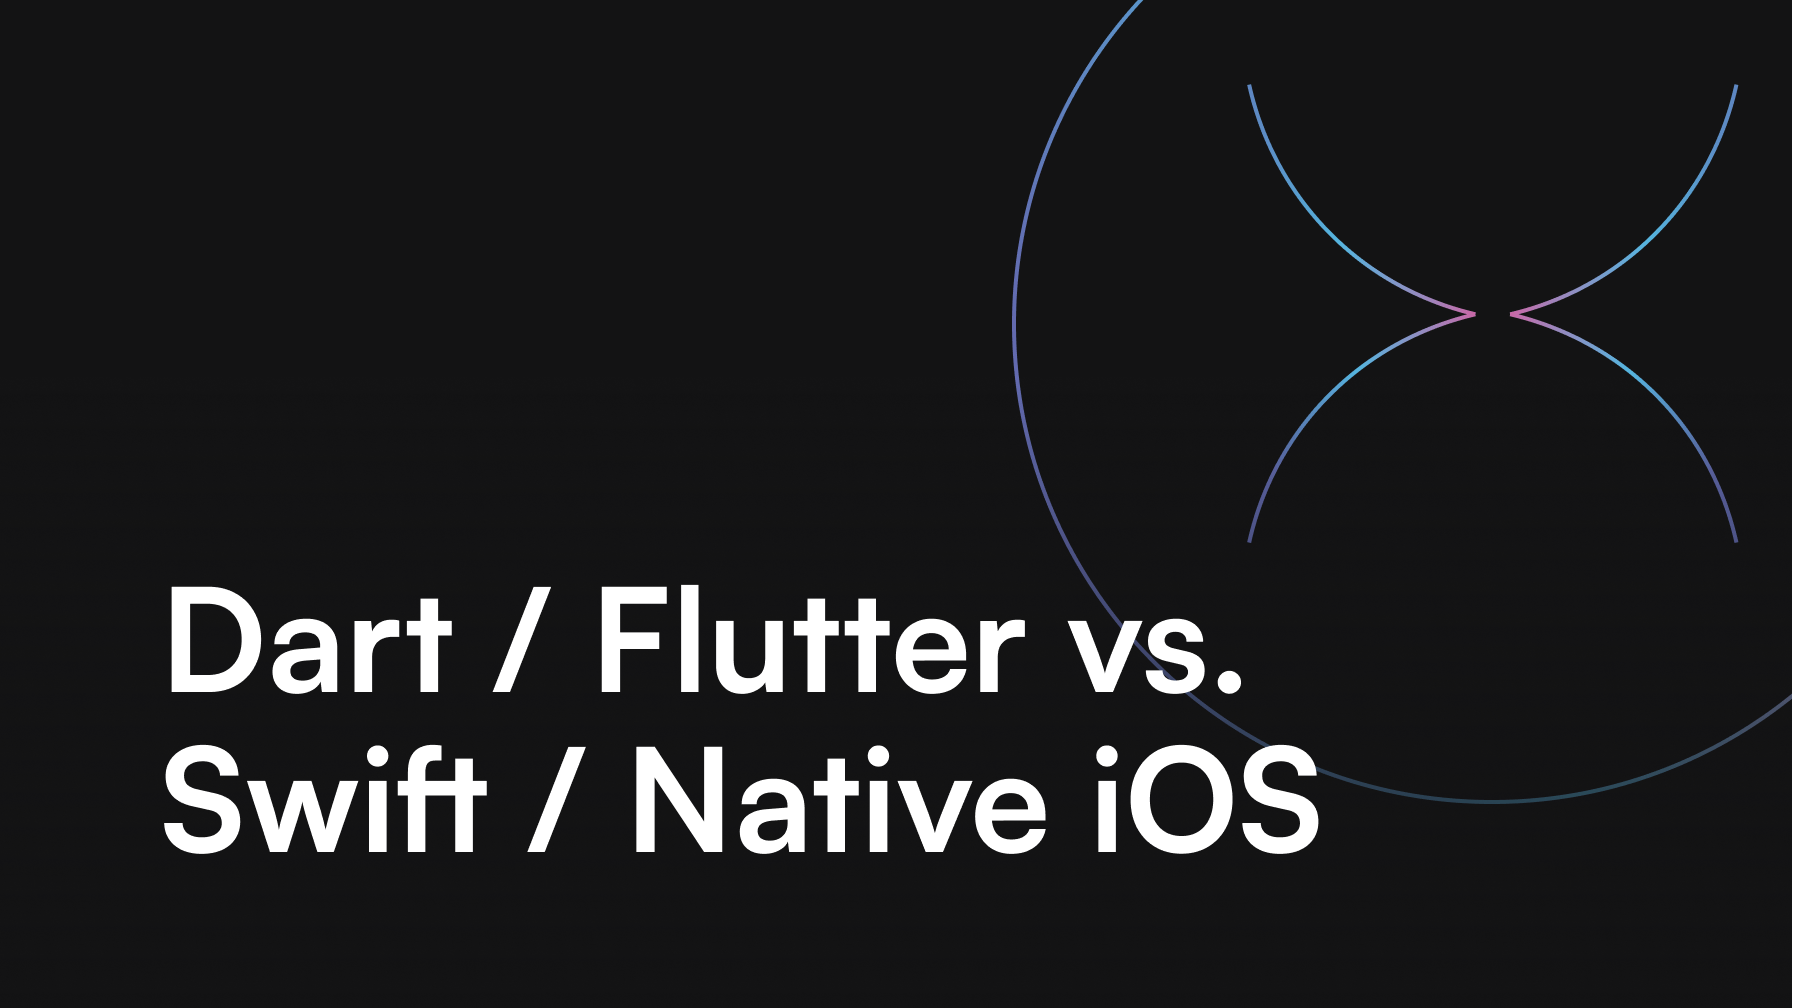 Extraordinary dream Thank Dart / Flutter vs. Swift / Native iOS – which one is better in 2021? -  itCraft